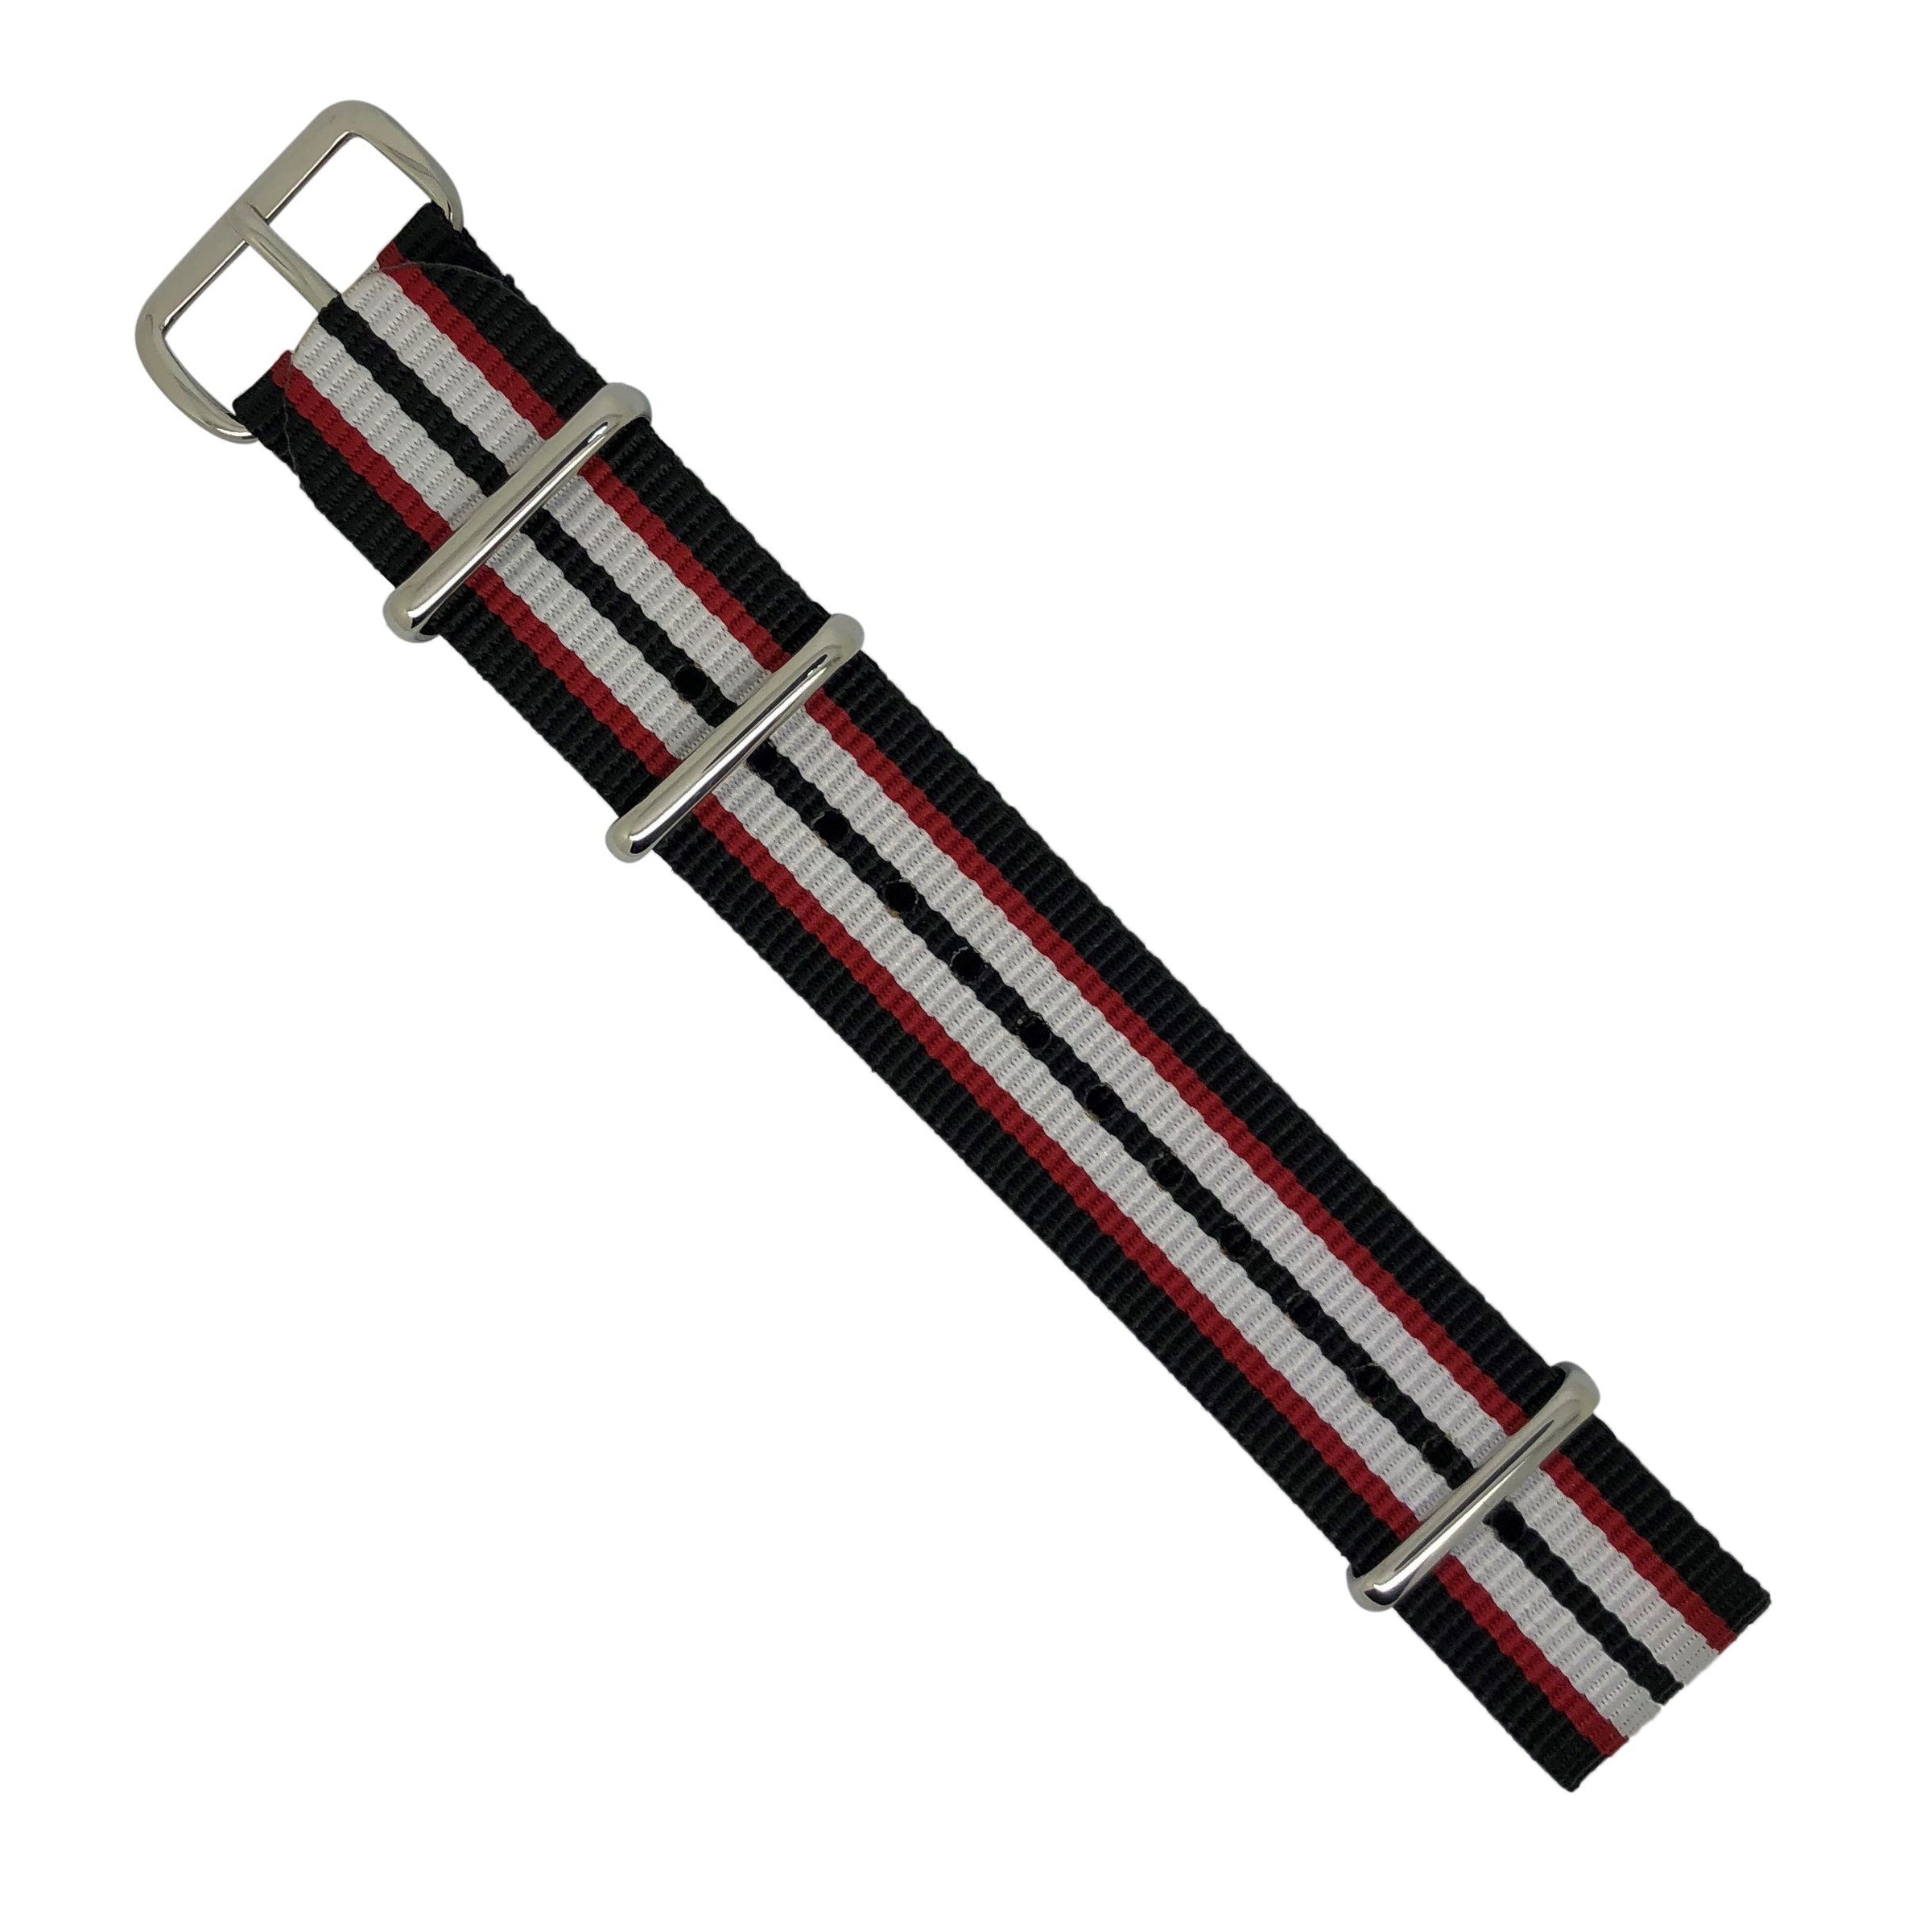 Premium Nato Strap in Black Red White with Polished Silver Buckle (20mm) - Nomadstore Singapore